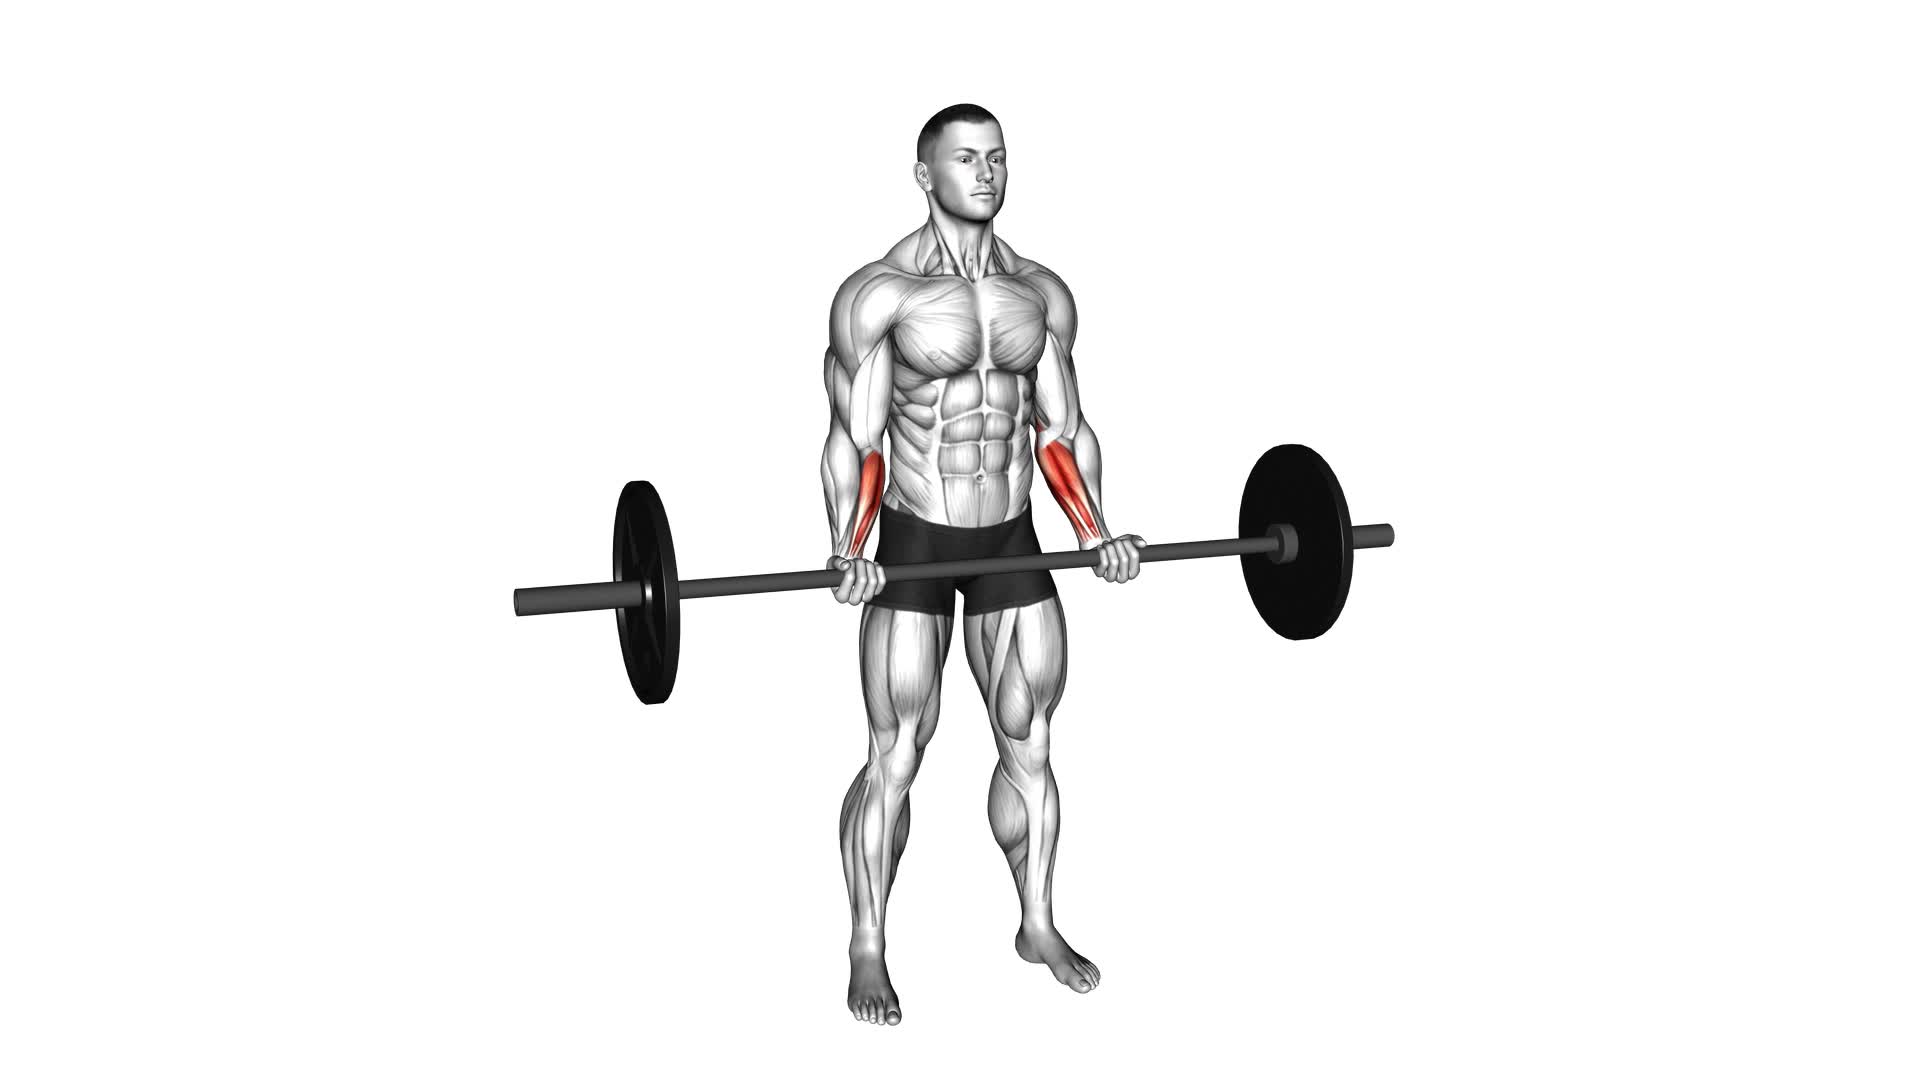 Barbell Standing Wrist Curl - Video Exercise Guide & Tips